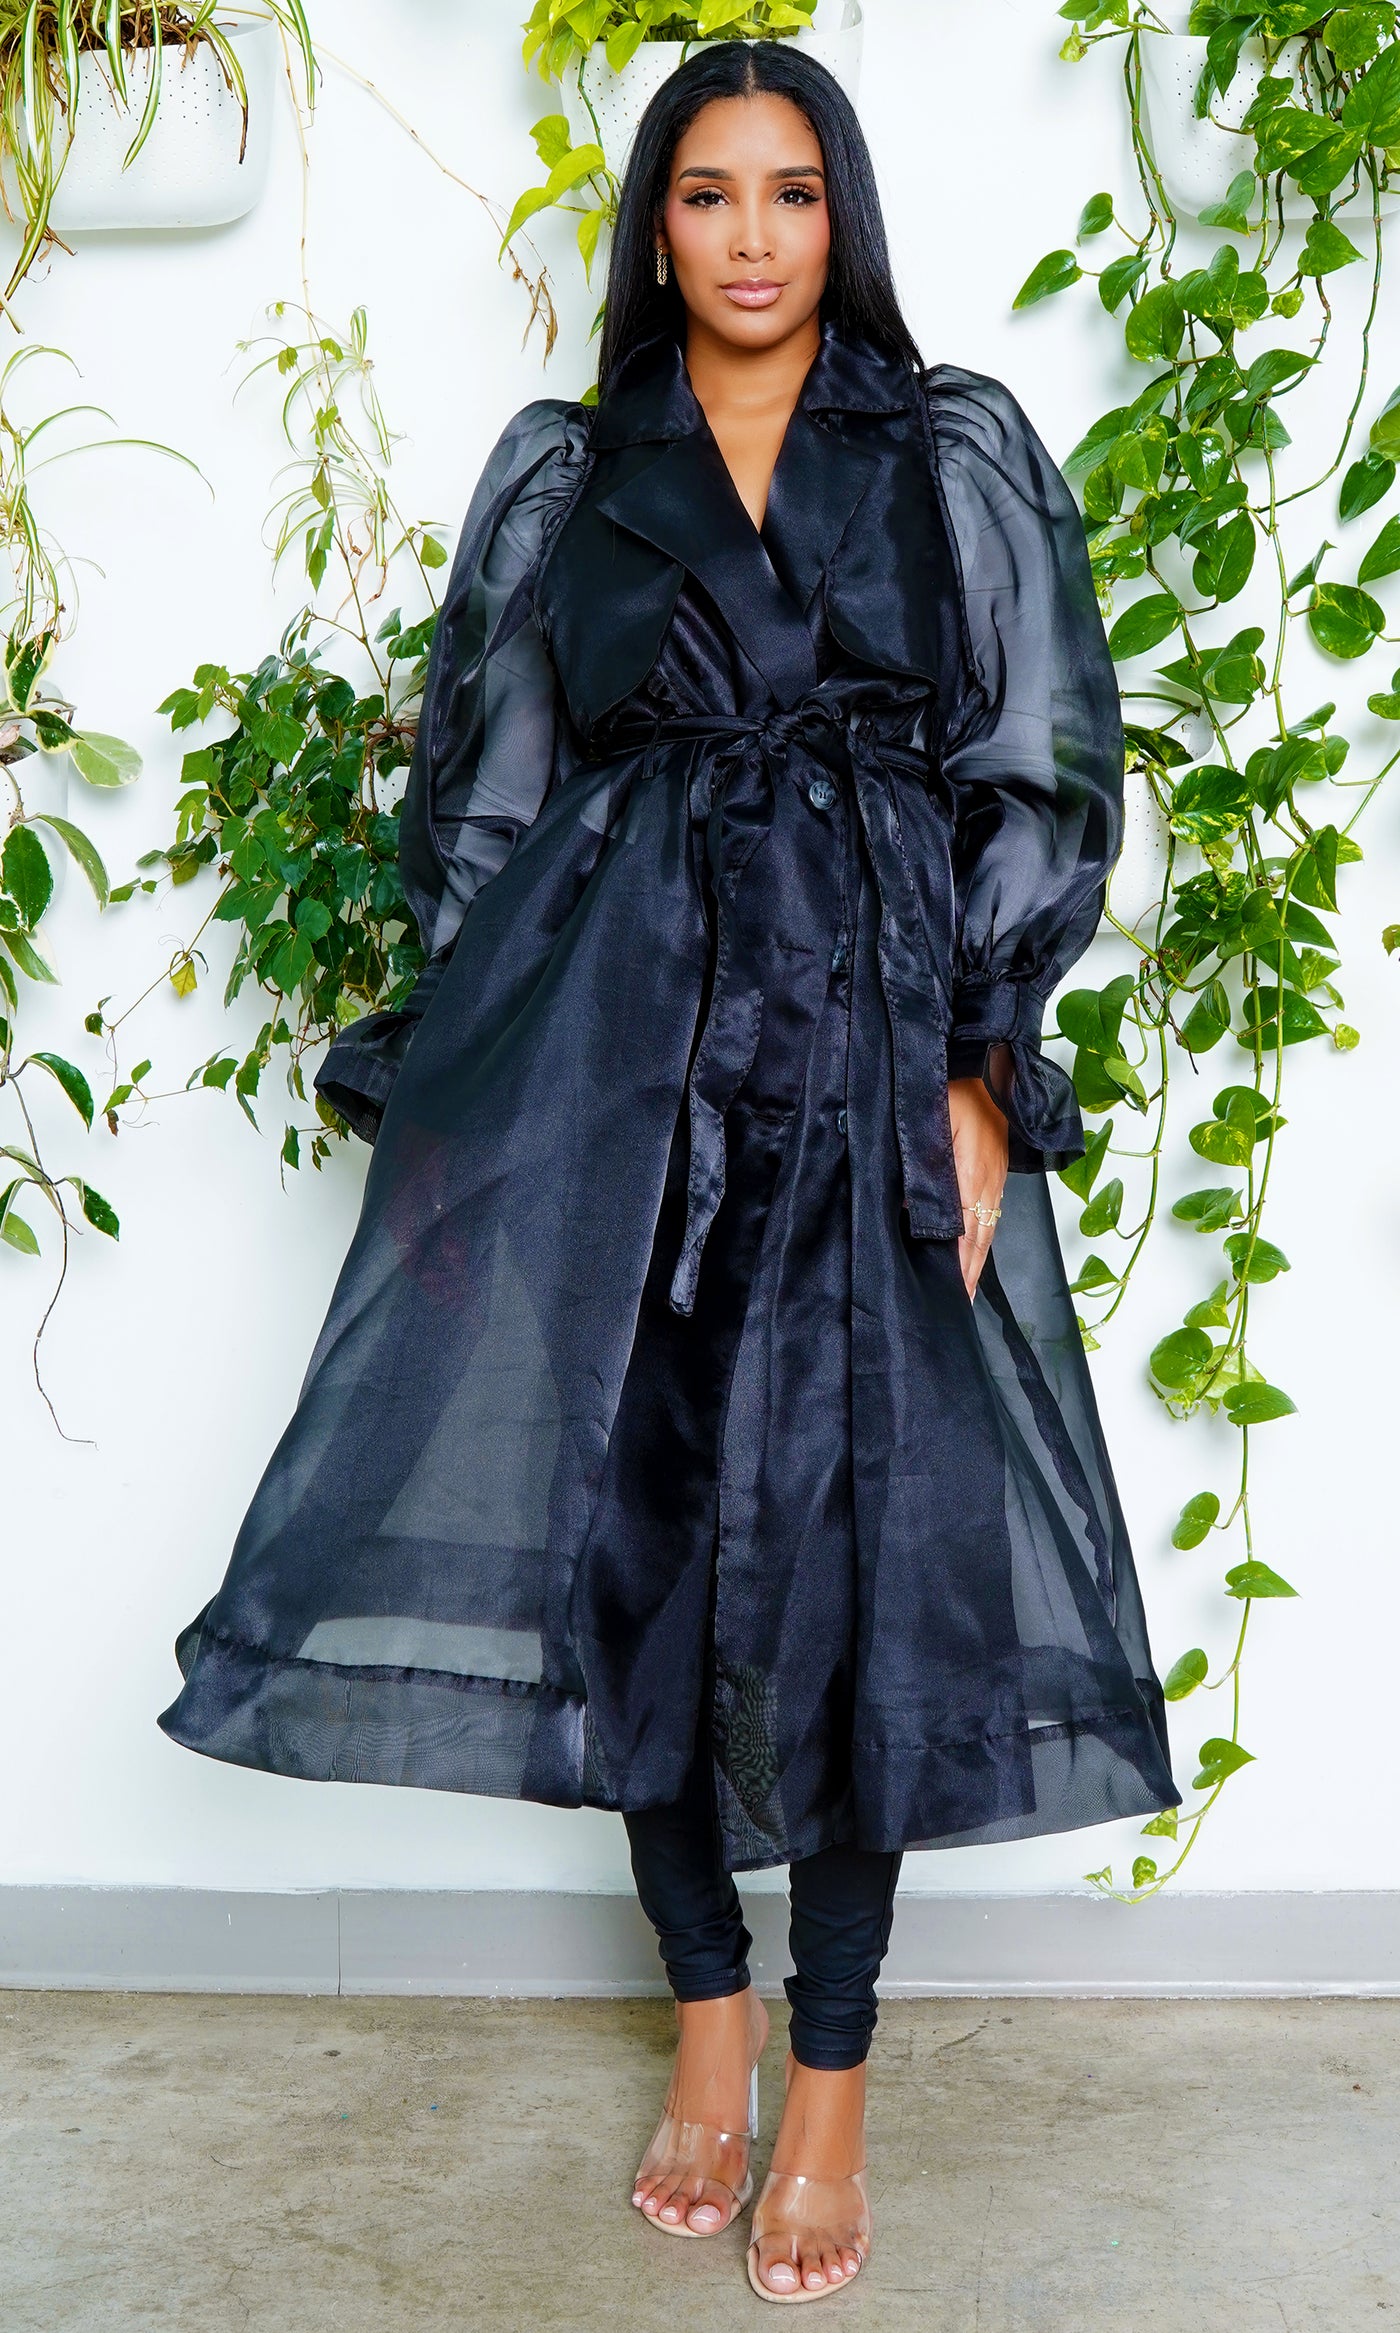 The 'Drama' Black Organza Coat - Cutely Covered